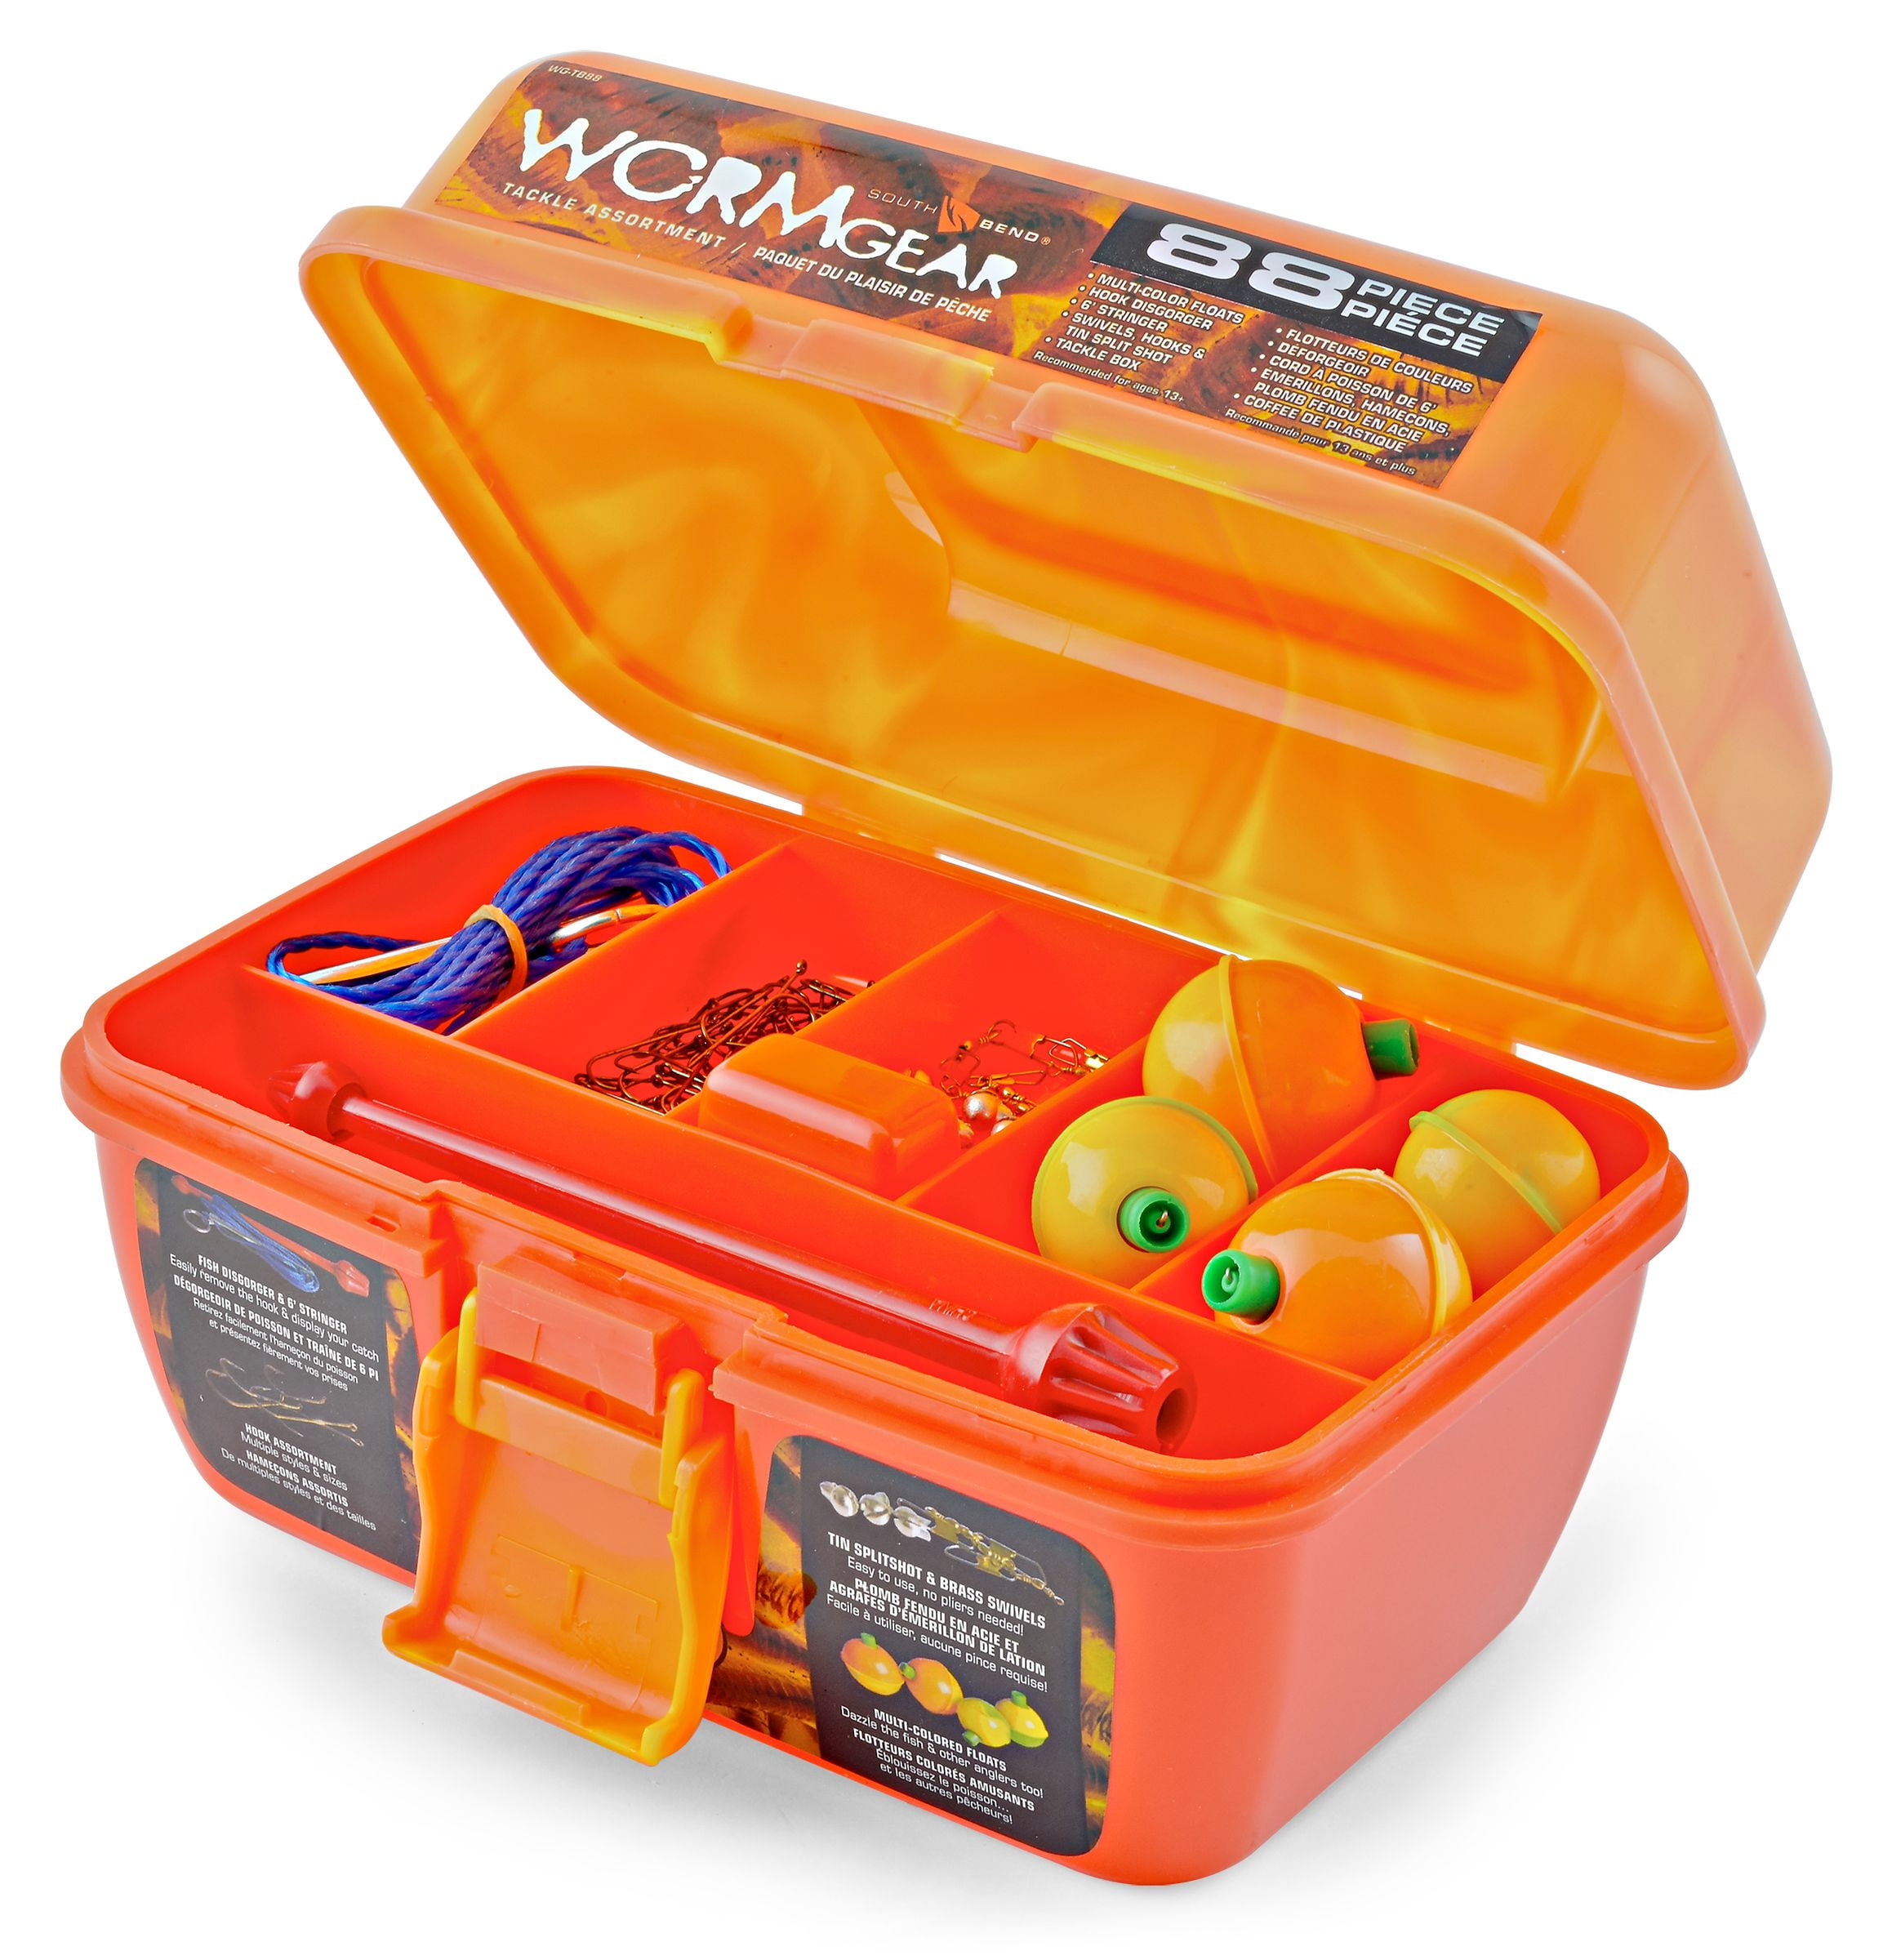 South Bend® WormGear Tackle Box including 88 Pieces, Orange 